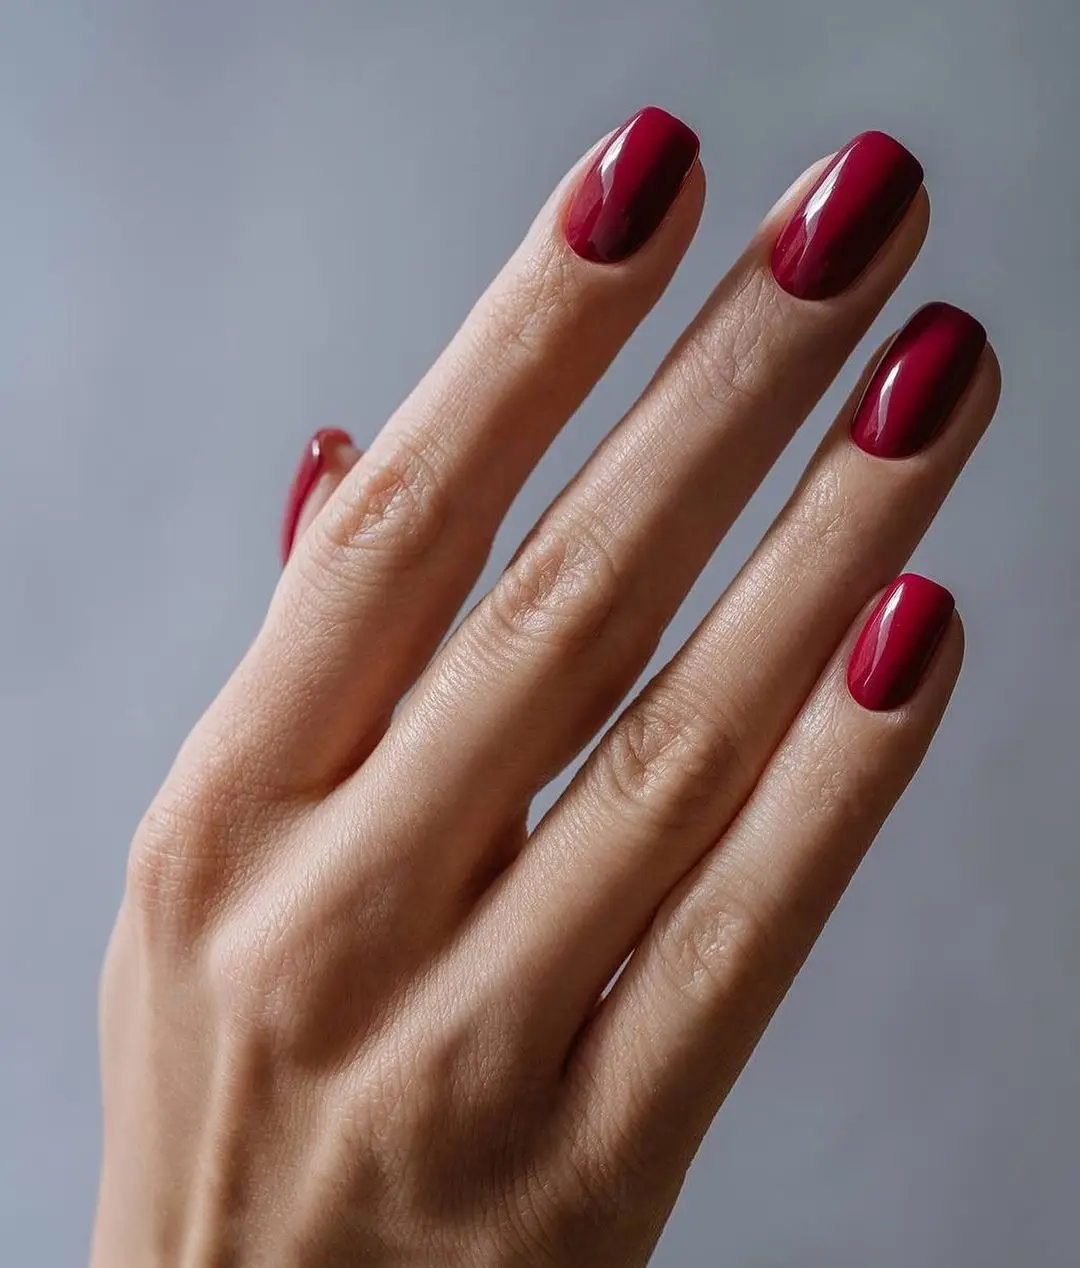 11 Helpful Tips on How to Make Your Nails Dry Faster ...